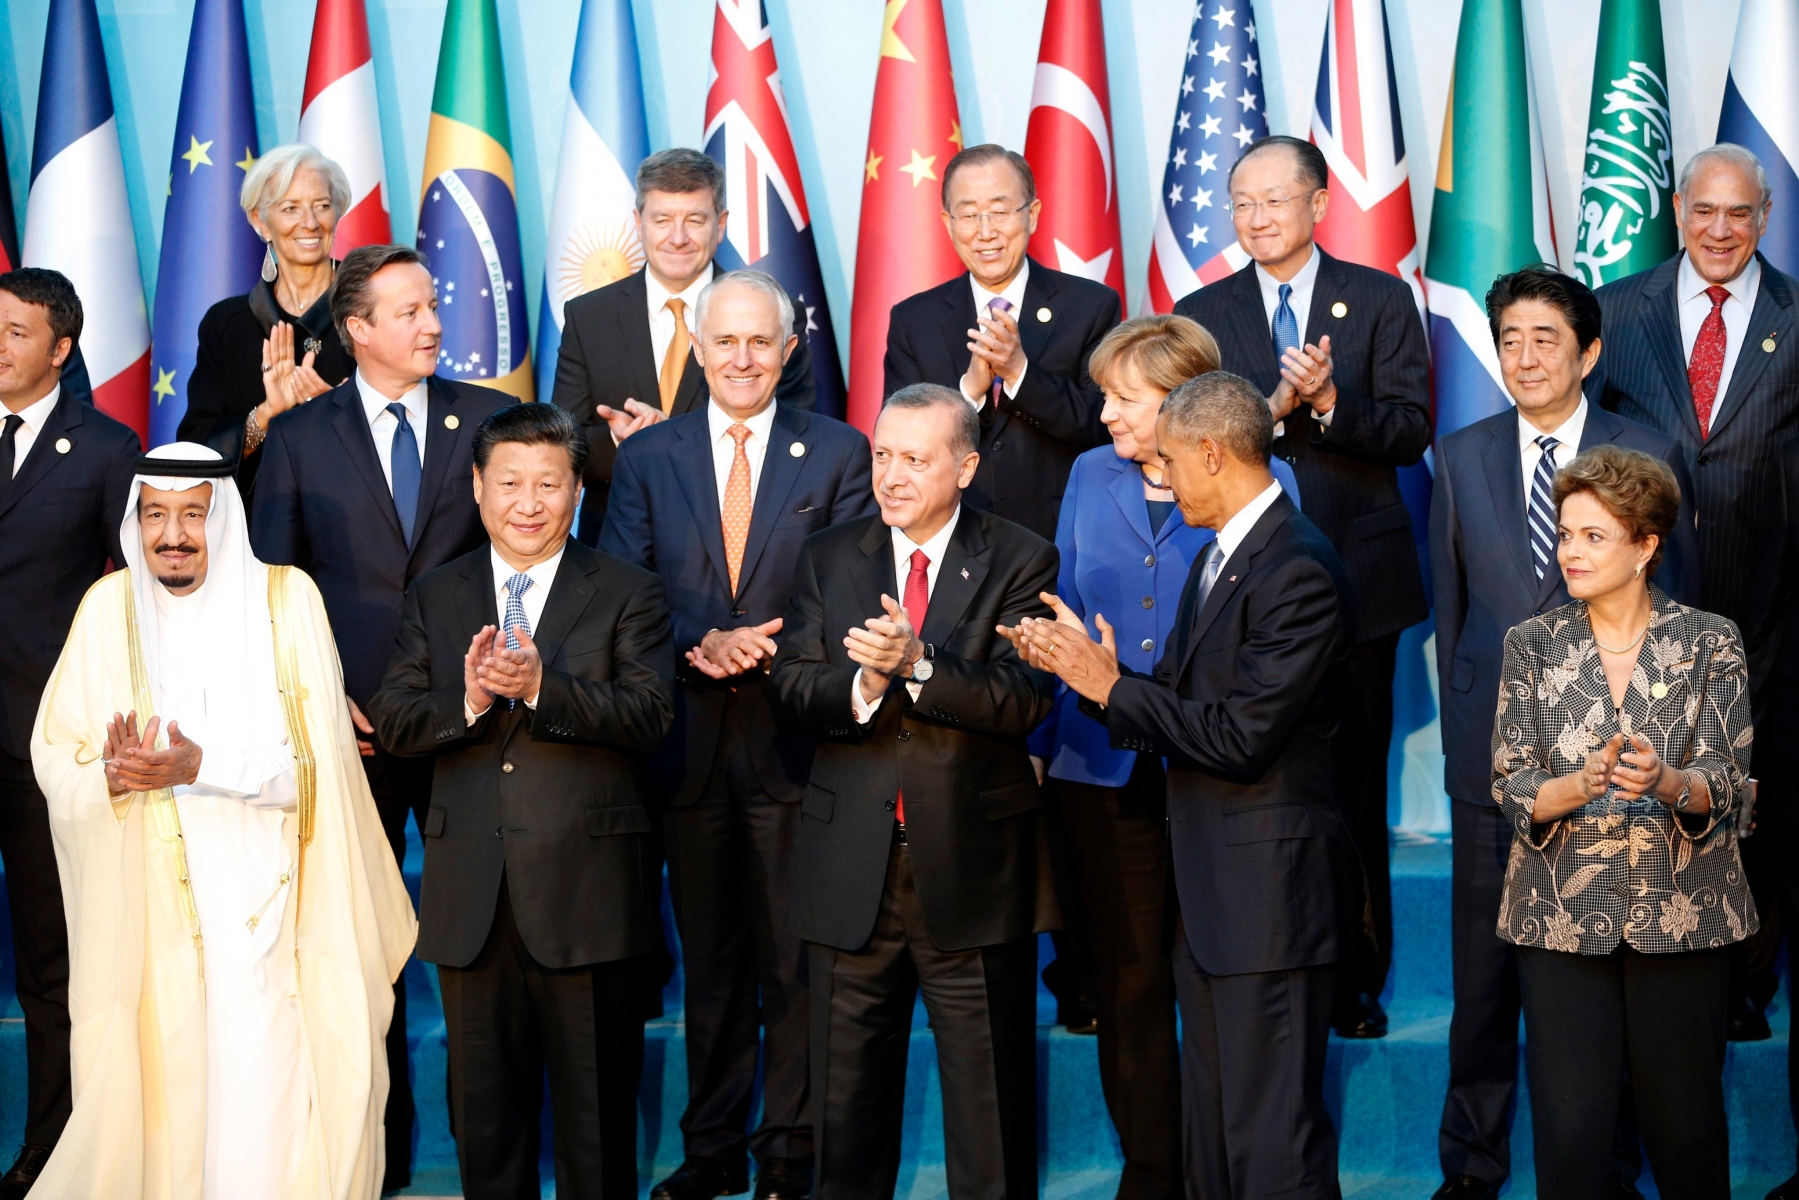 epa05026601 Leaders pose for the family photo at G20 summit in Antalya, Turkey, 15 November 2015. In additional to discussions on the global economy, the G20 grouping of leading nations is set to focus on Syria during its summit this weekend, including the refugee crisis and the threat of terrorism.  EPA/TOLGA BOZOGLU TURKEY G20 SUMMIT